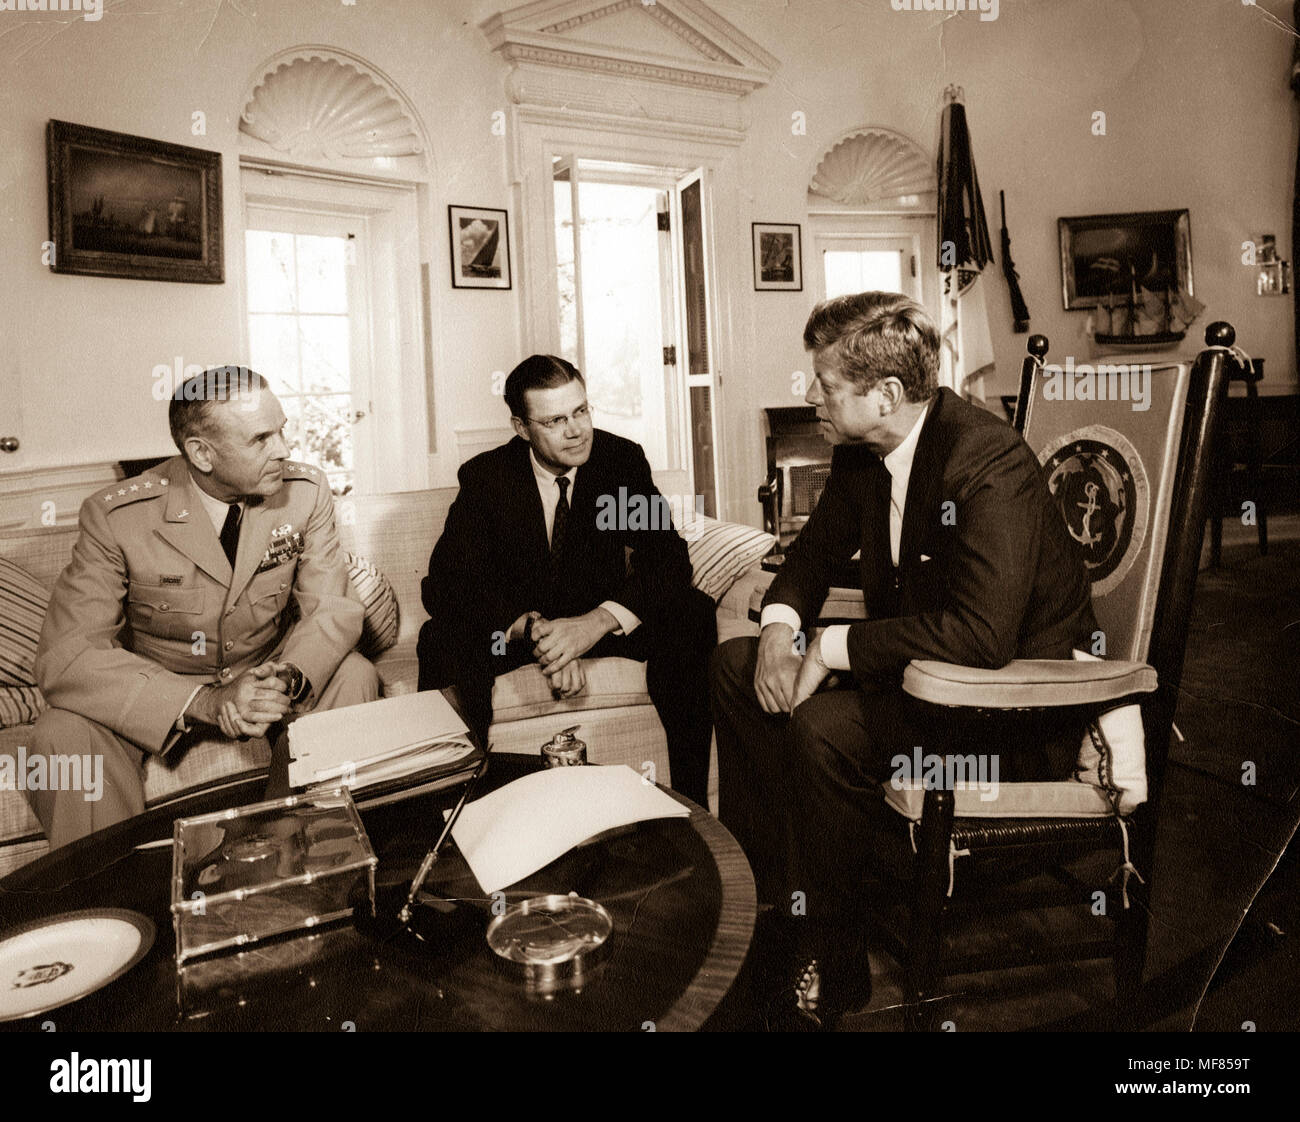 AR8153-A                       2 October 1963  President Kennedy meets with General Maxwell Taylor and Secretary of Defense, Robert McNamara after their trip to Vietnam.   Photograph by Abbie Rowe, White House in the John F. Kennedy Presidential Library and Museum, Boston. Stock Photo